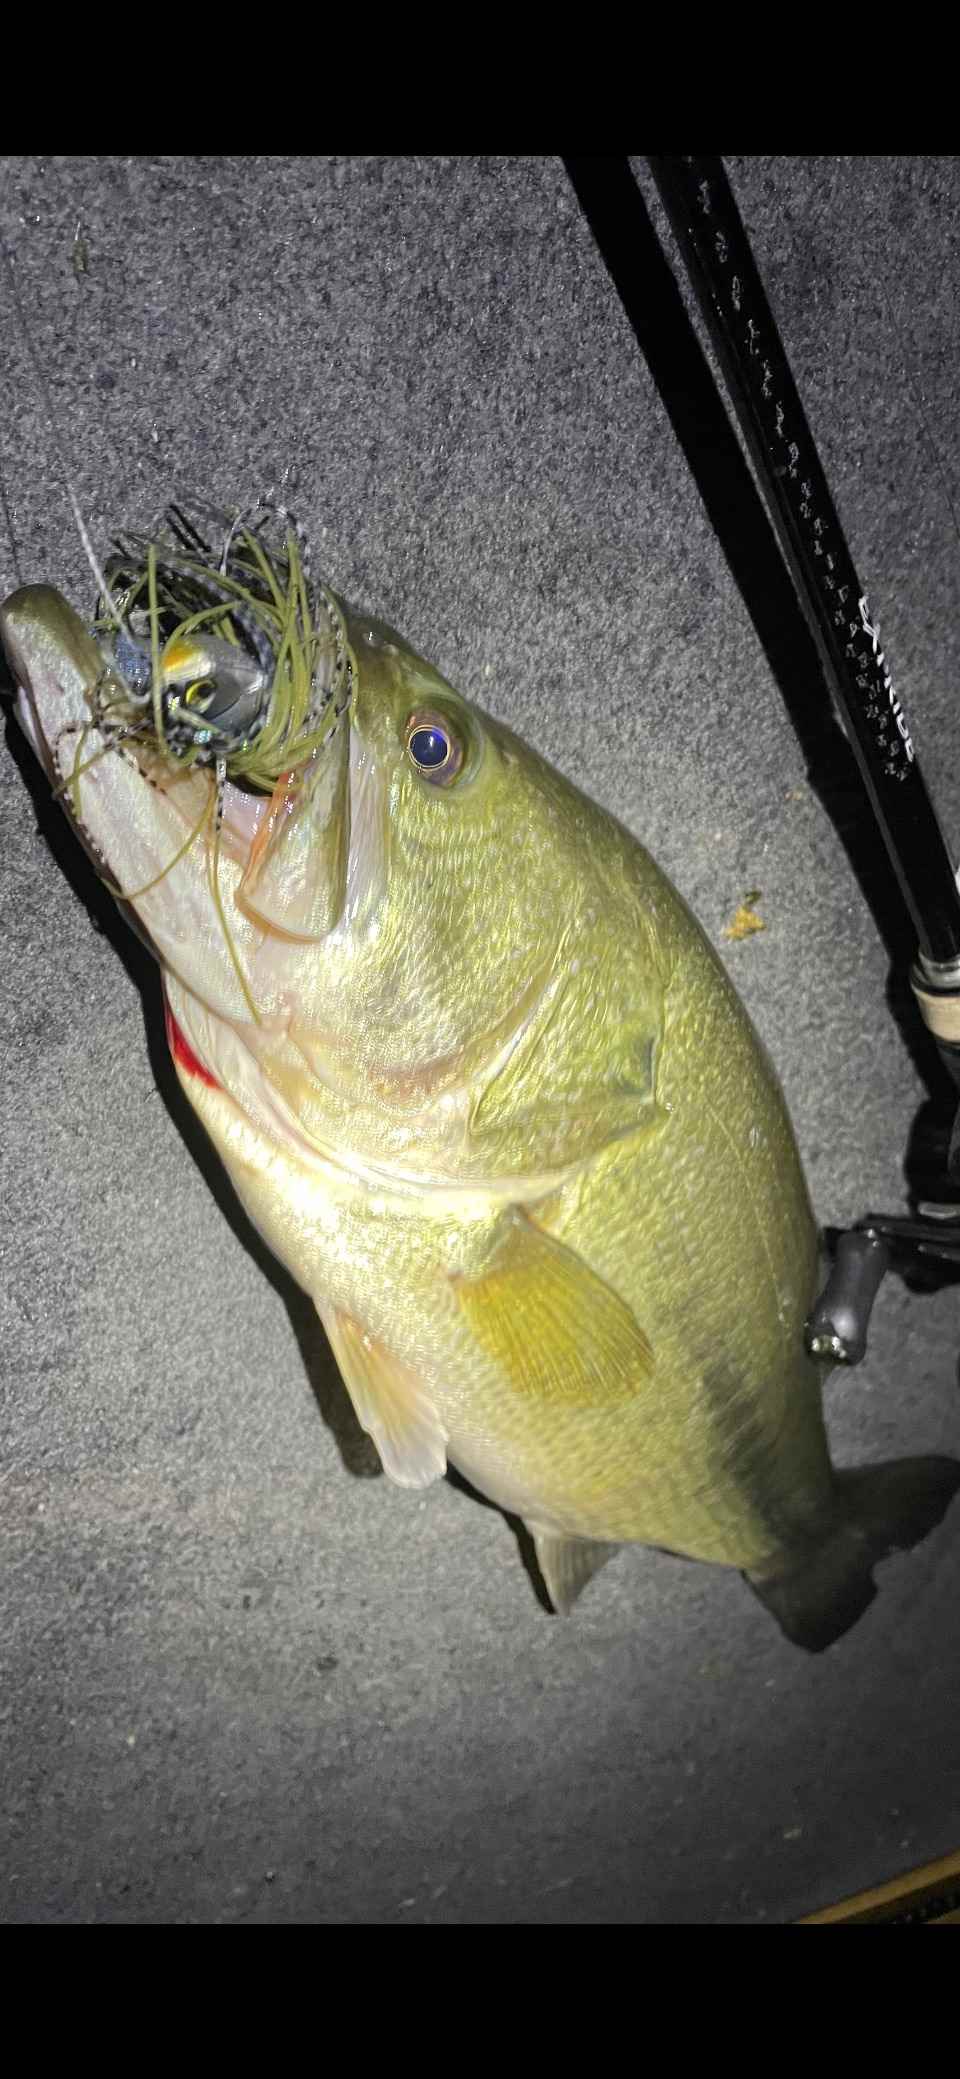 Swim Jig Heads - Calling on Experts - Fishing Tackle - Bass Fishing Forums